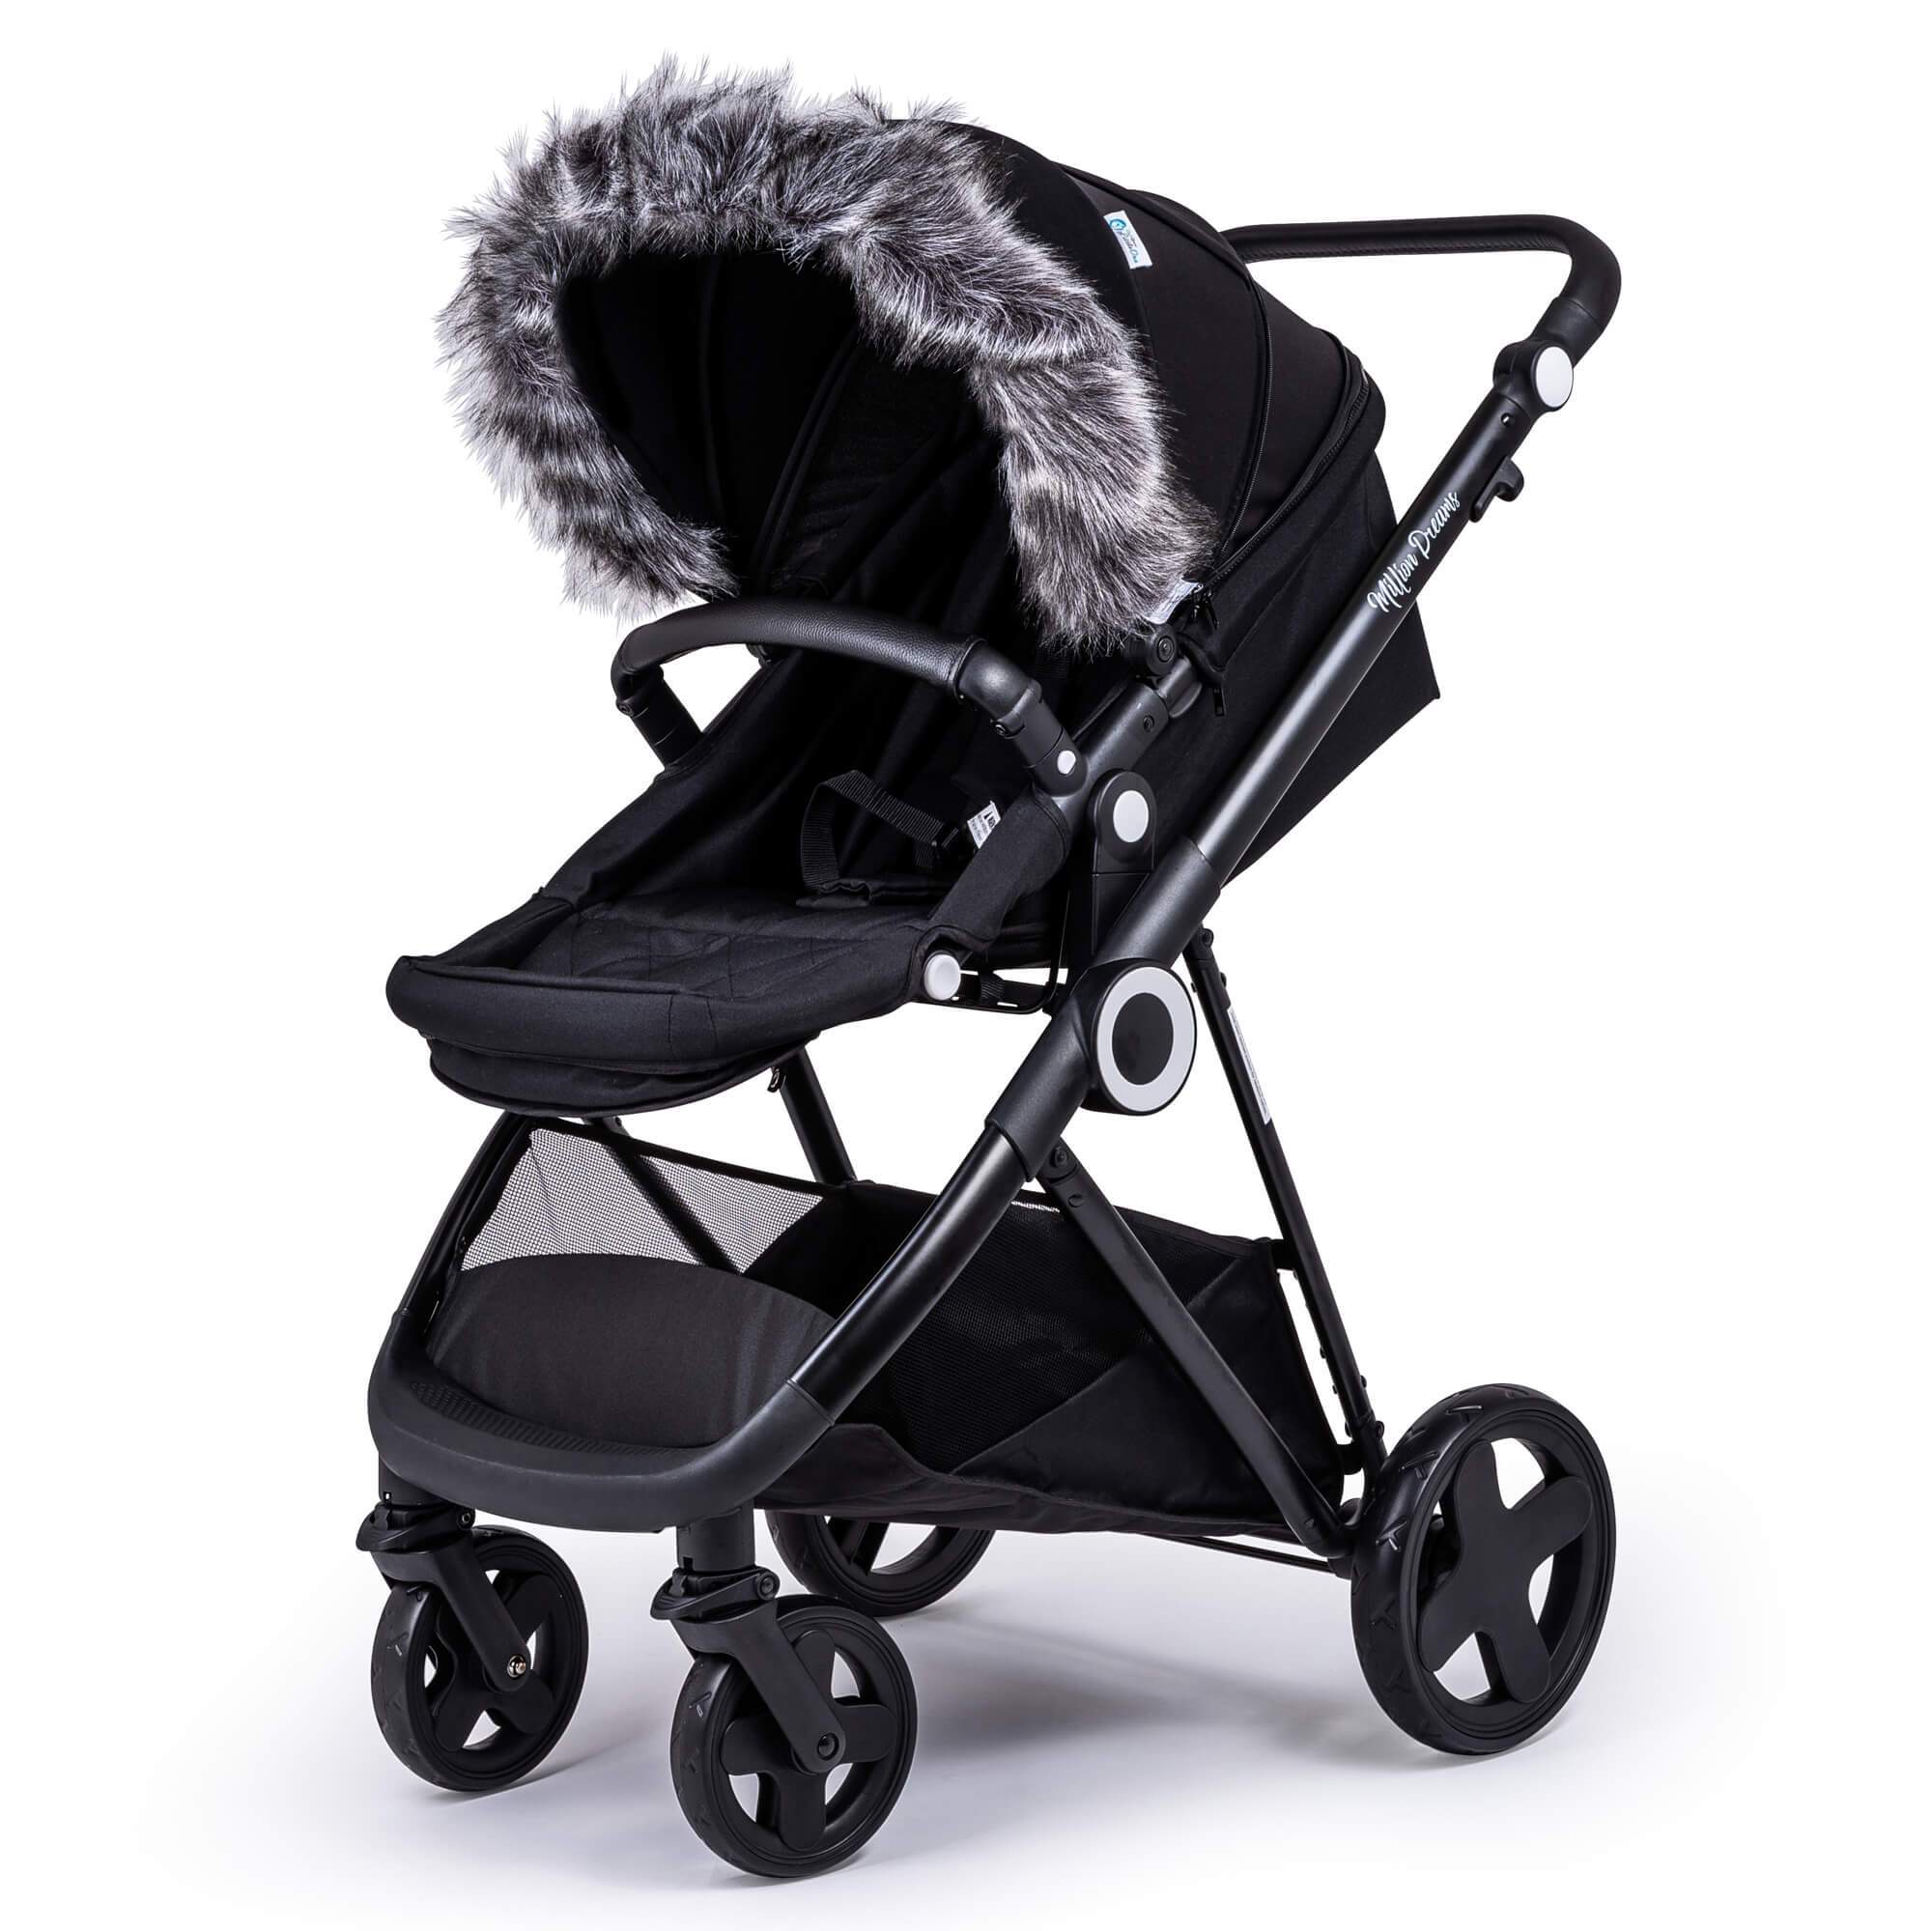 Pram Fur Hood Trim Attachment for Pushchair Compatible with Baby Weavers - Dark Grey / Fits All Models | For Your Little One